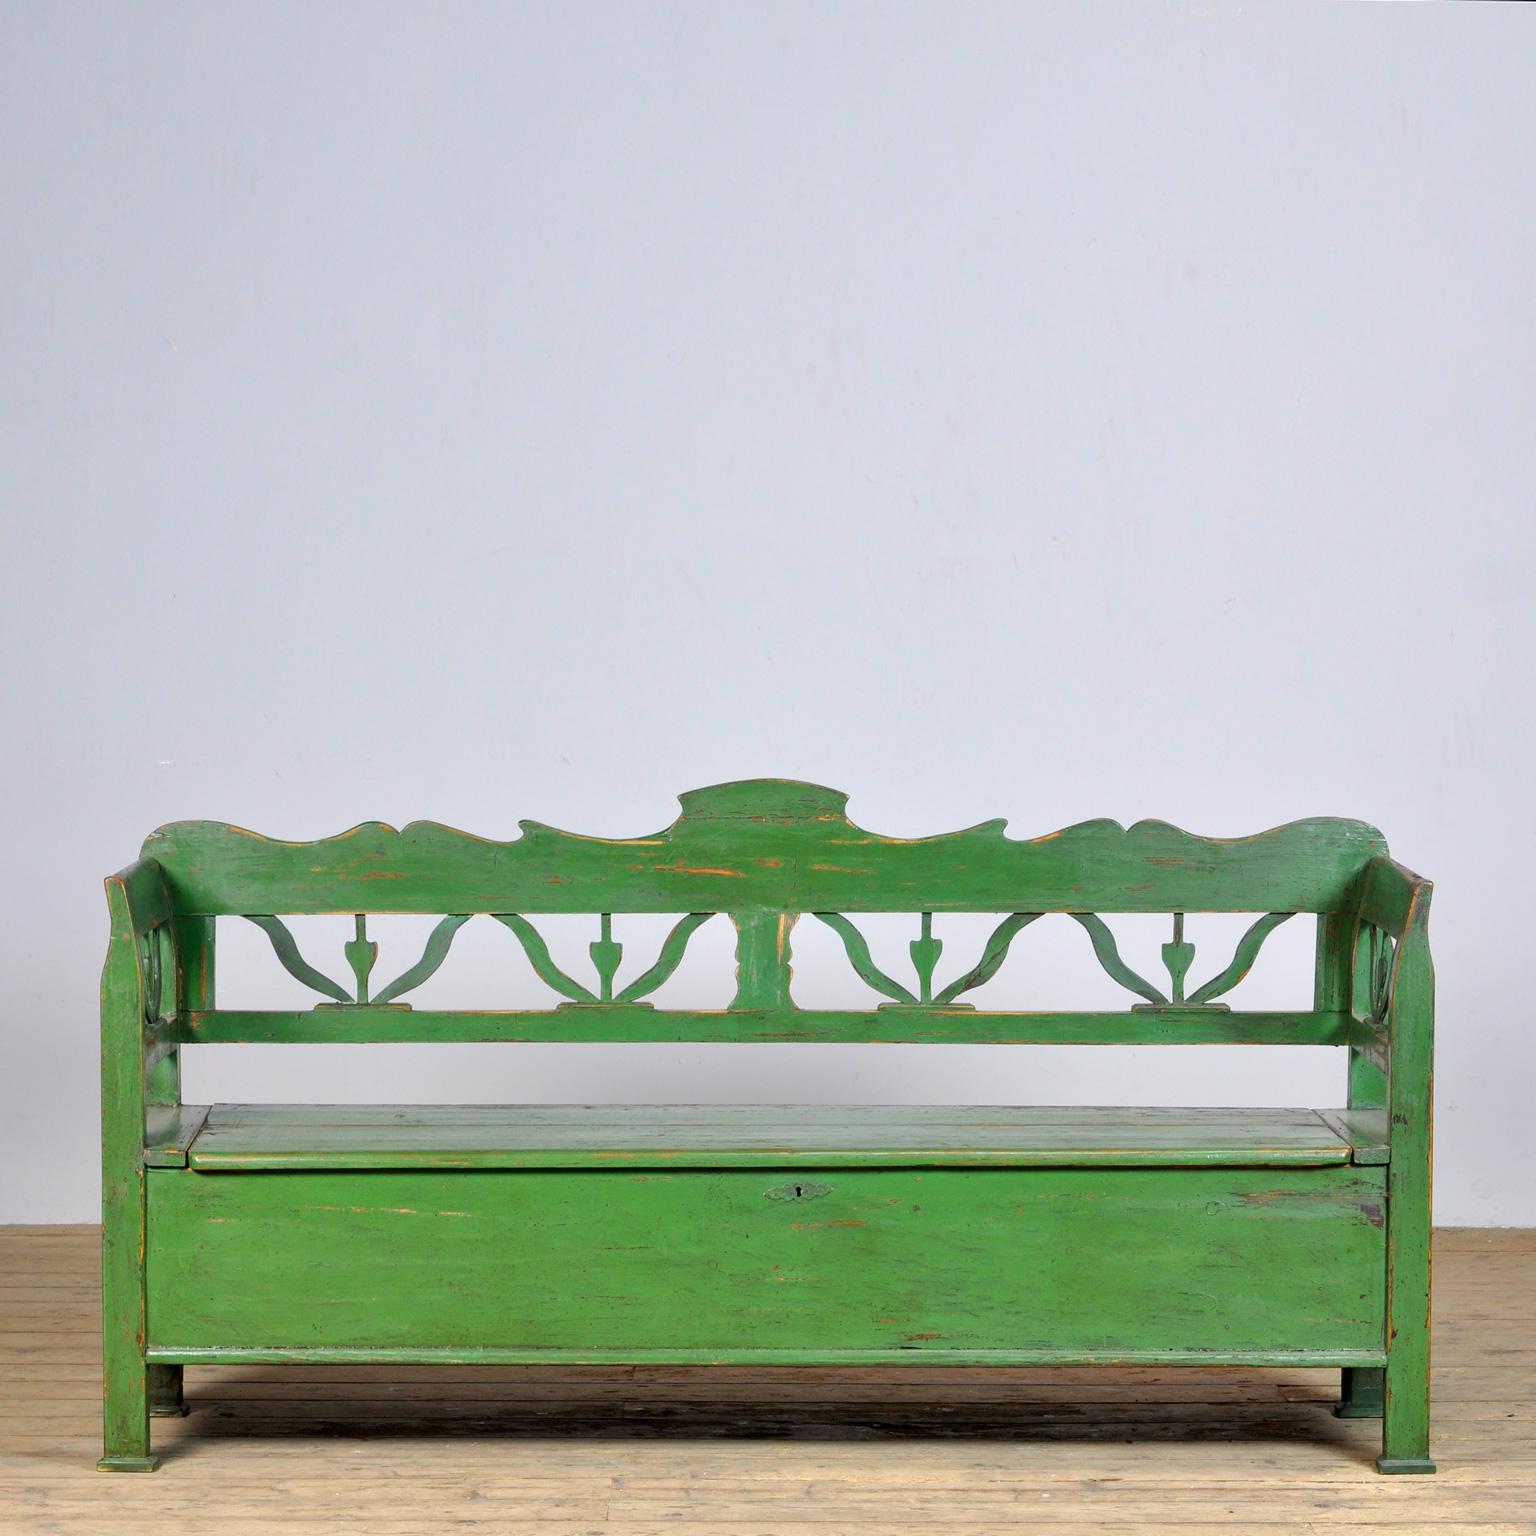 A charming bench from Hungary with the original paint. Over time and use, the green paint has been worn away in places to the wood. With storage space under the seat. The bench is stable and sturdy. Free of woodworm.